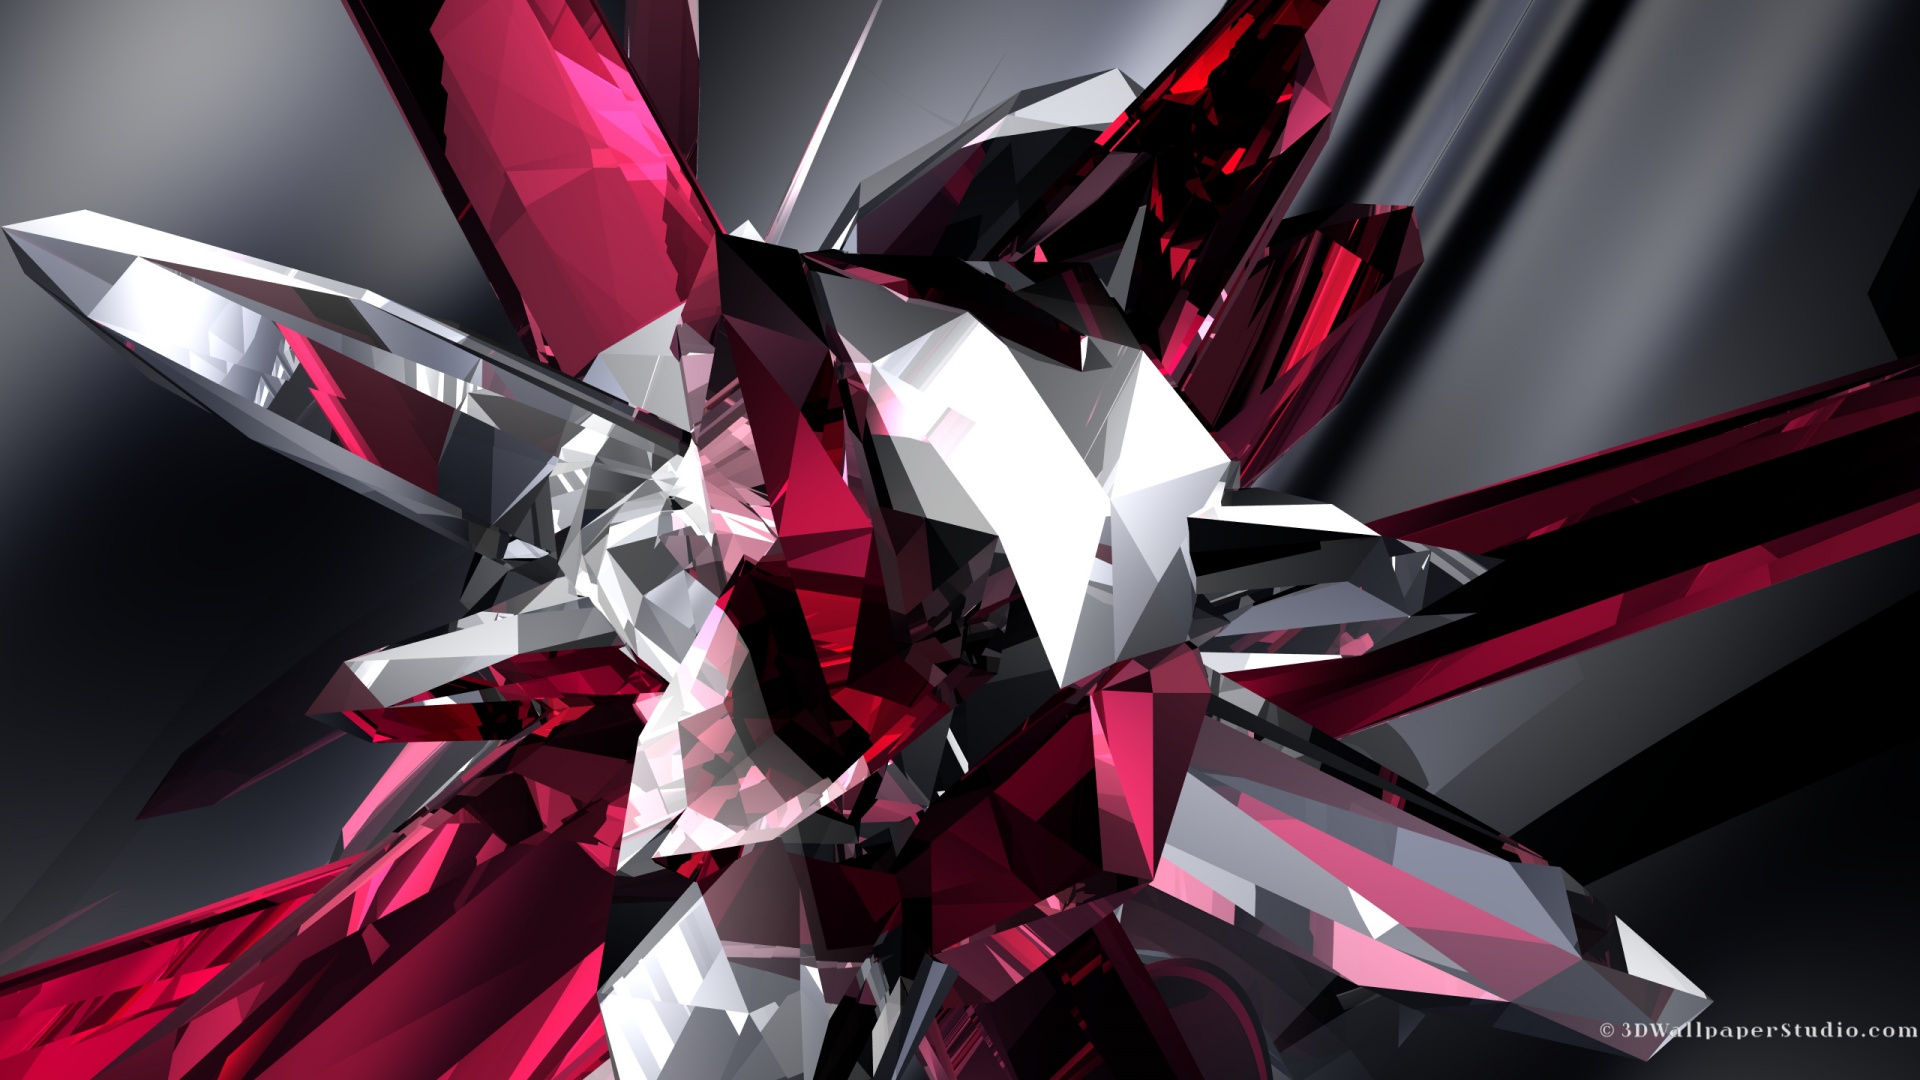 Wallpaper 3D crystals 1920x1200 HD Picture Image